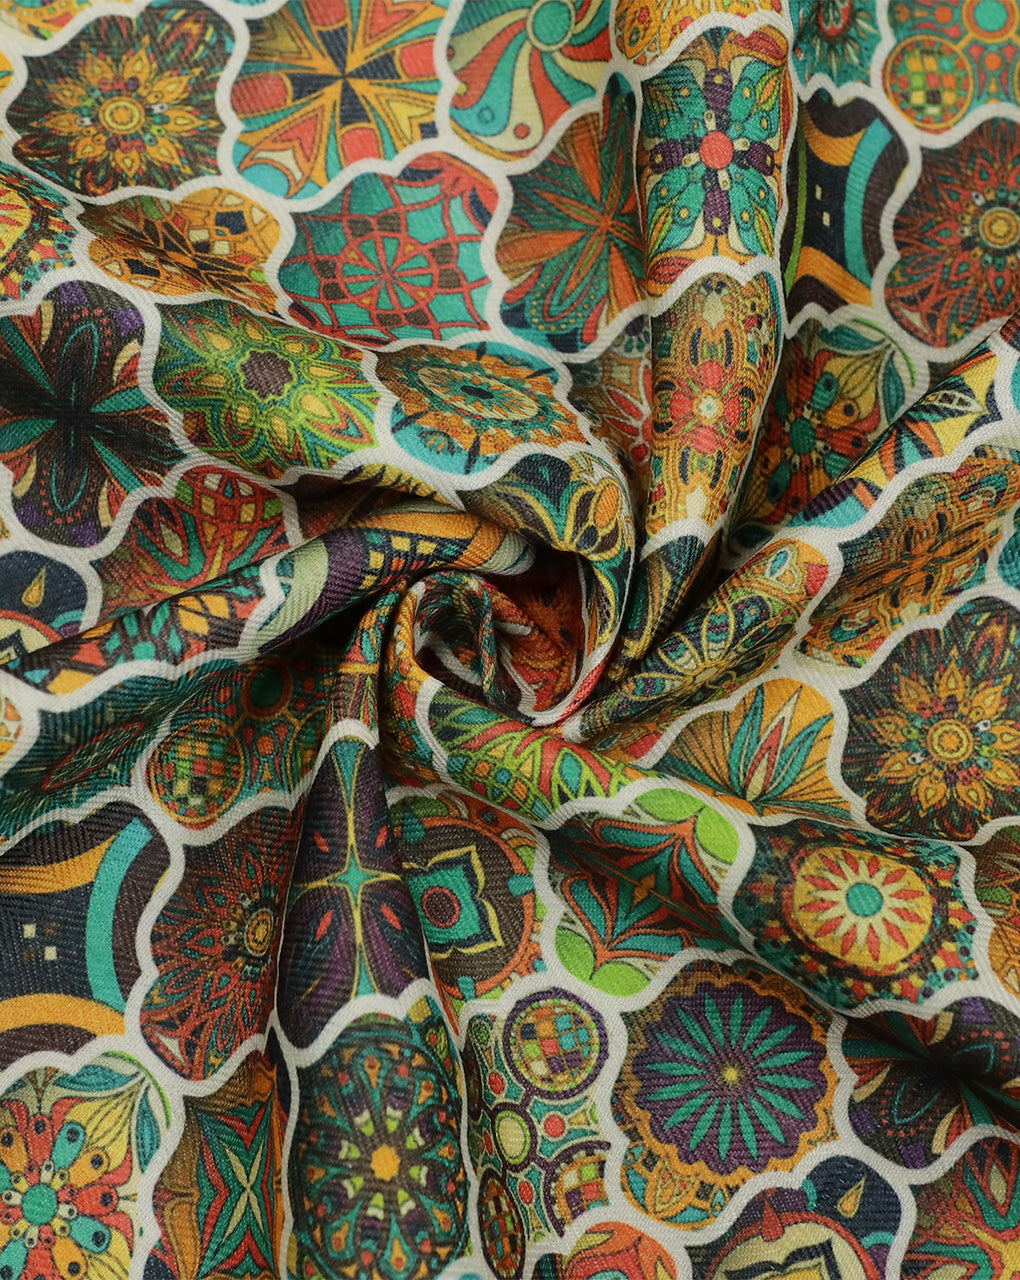 MULTICOLOR ABSTRACT DESIGN PRINTED POLYESTER SPUN FABRIC